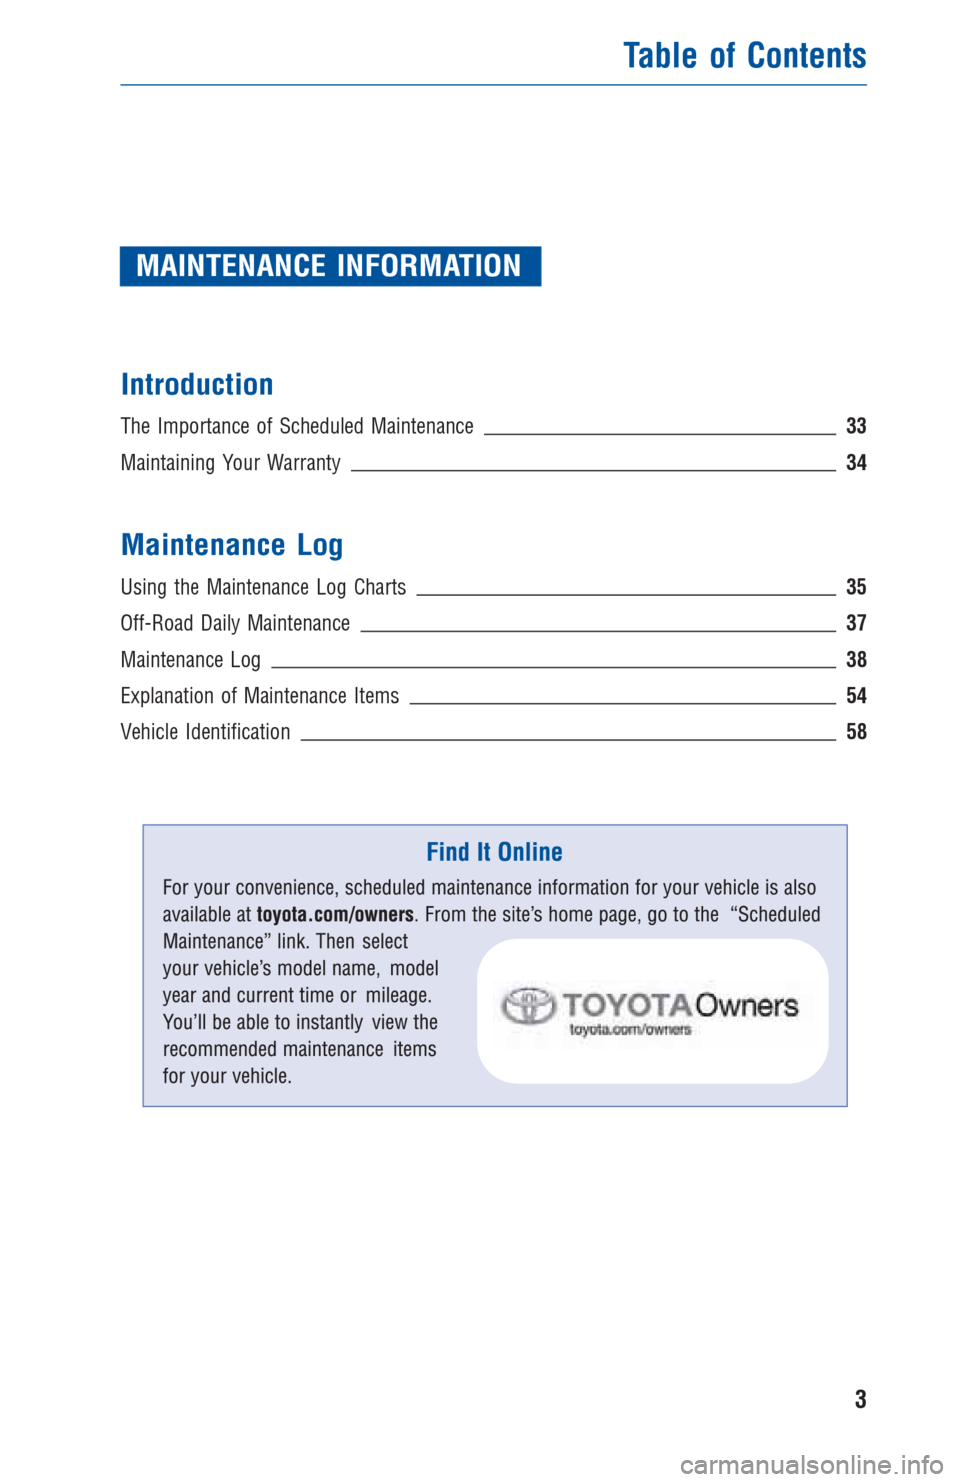 TOYOTA 4RUNNER 2012 N280 / 5.G Warranty And Maintenance Guide MAINTENANCE INFORMATION
Introduction
The Importance of Scheduled Maintenance 33
Maintaining Your Warranty34
Maintenance Log
Using the Maintenance Log Charts35
Off-Road Daily Maintenance37
Maintenance 